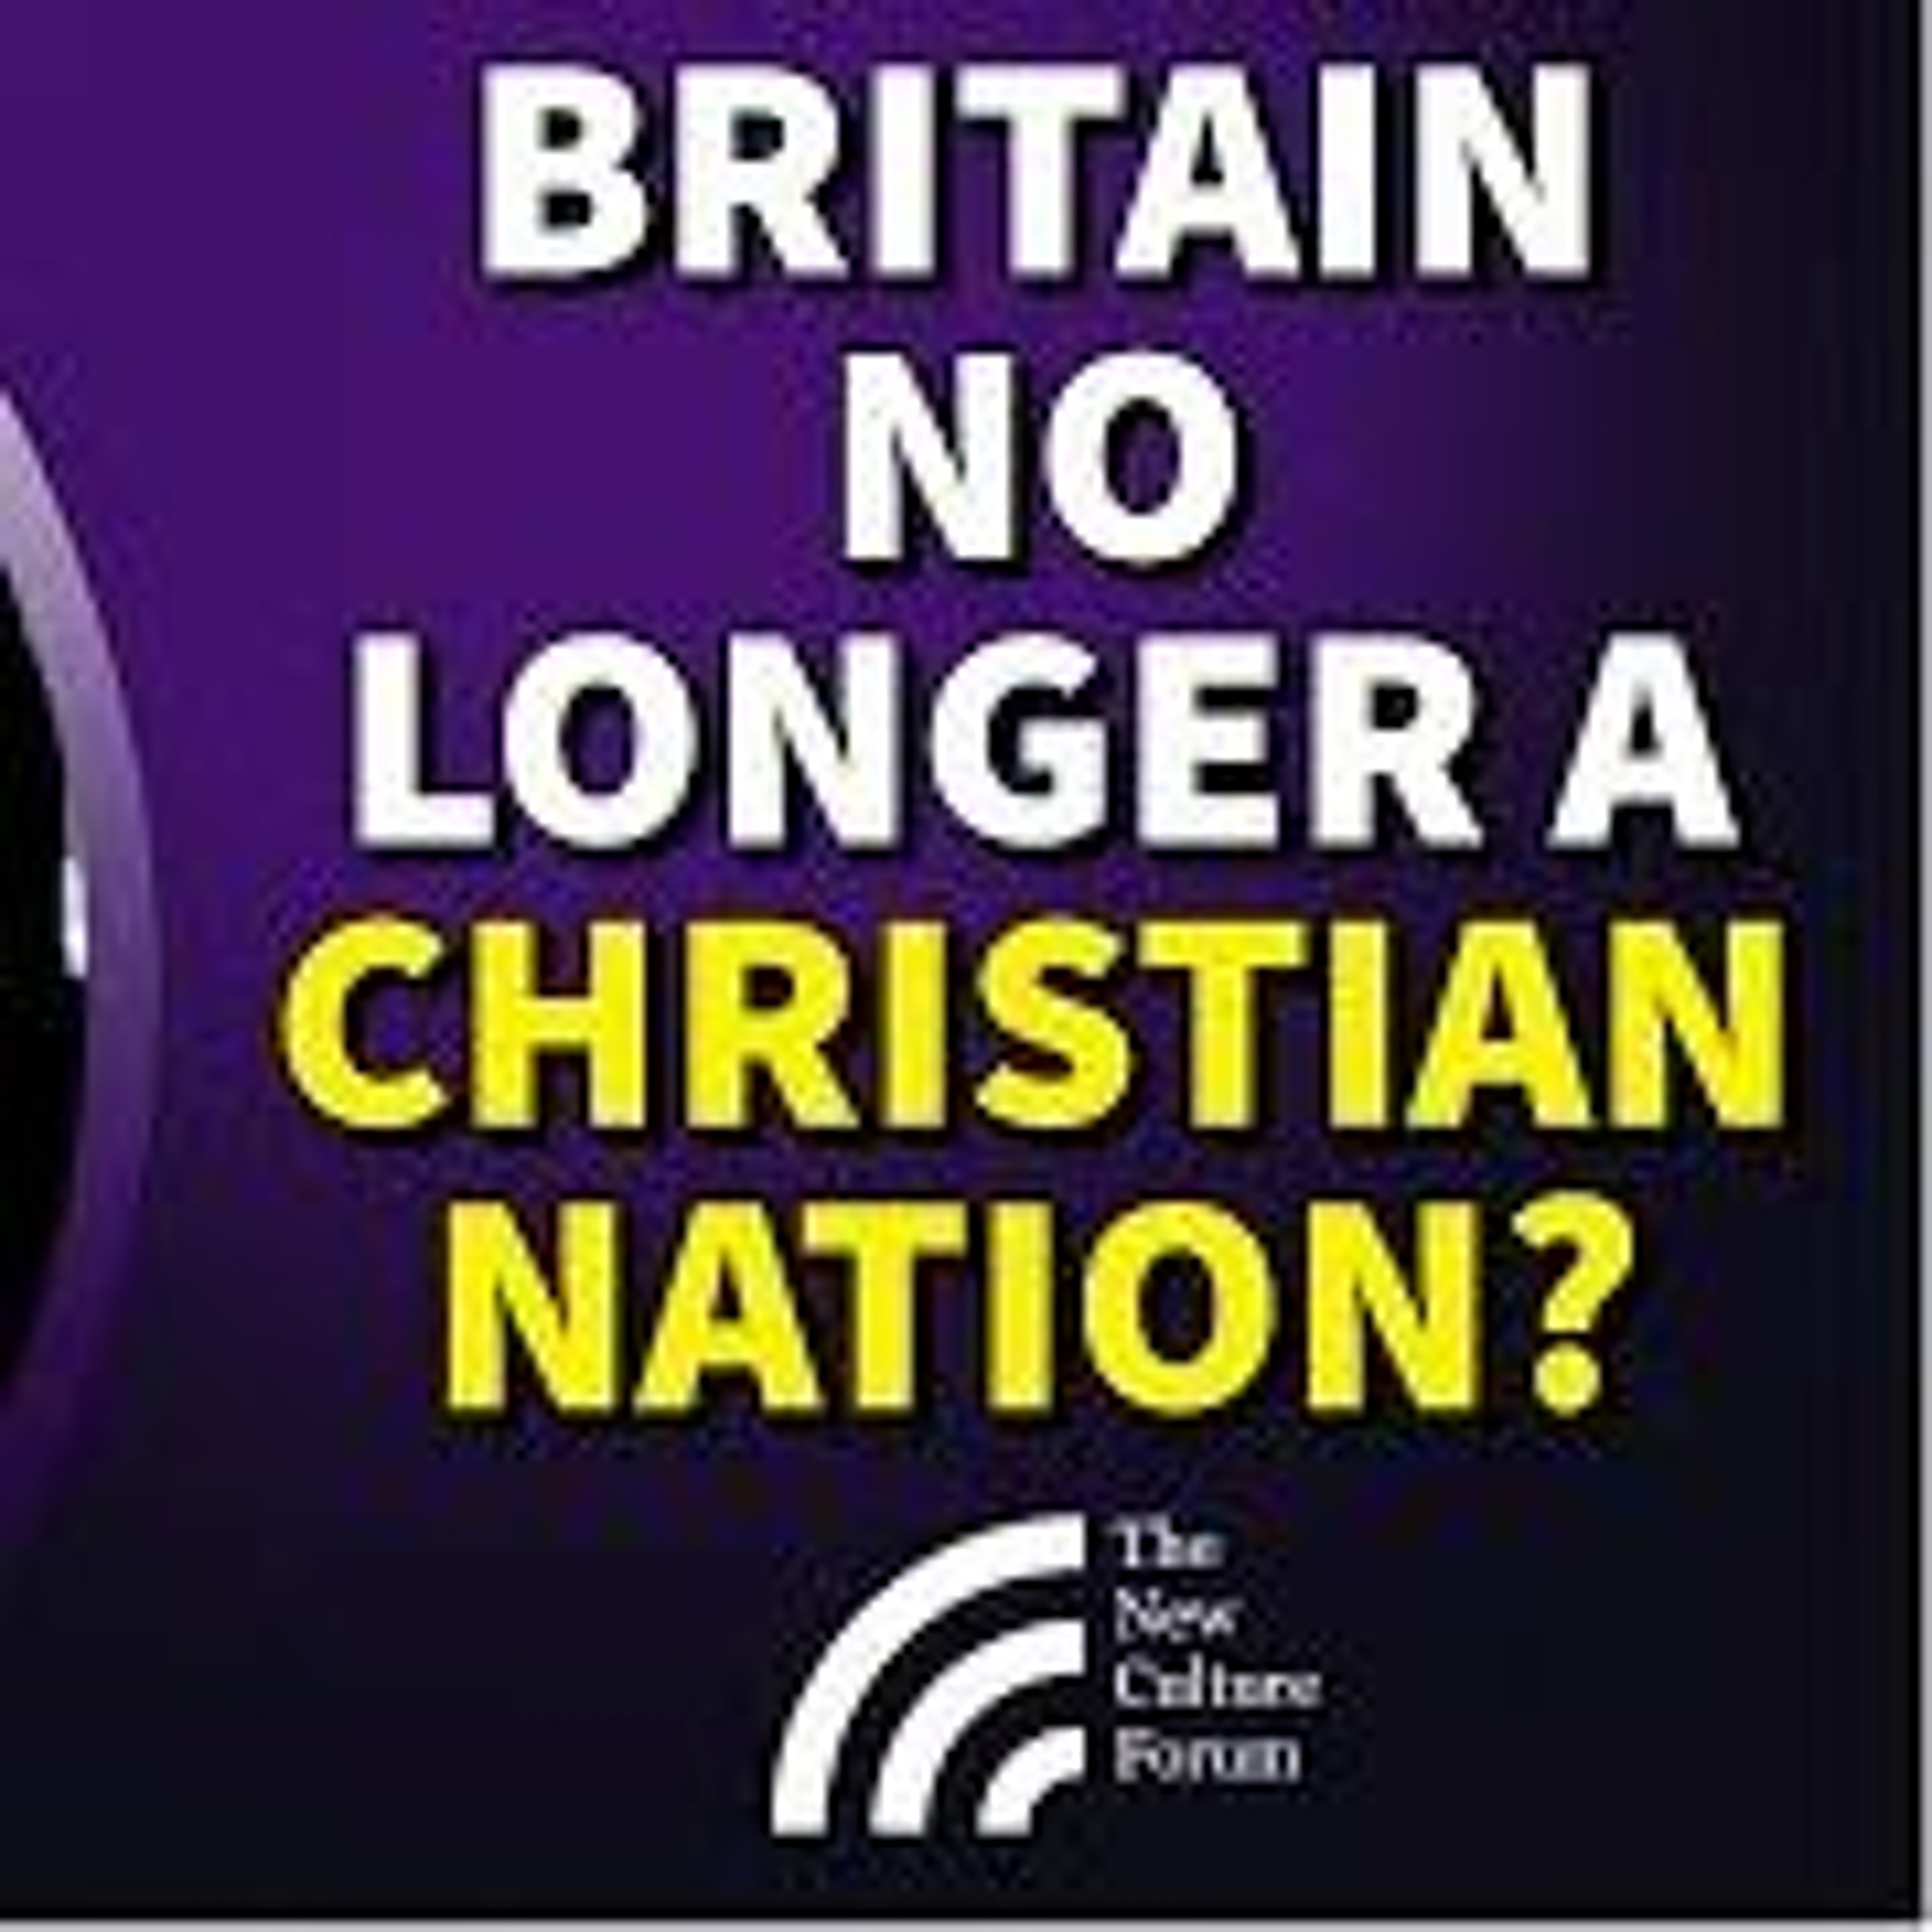 ULEZ: Punishing the Poor. Time for Notting Hill Carnival to End? Is Britain a Christian Nation?